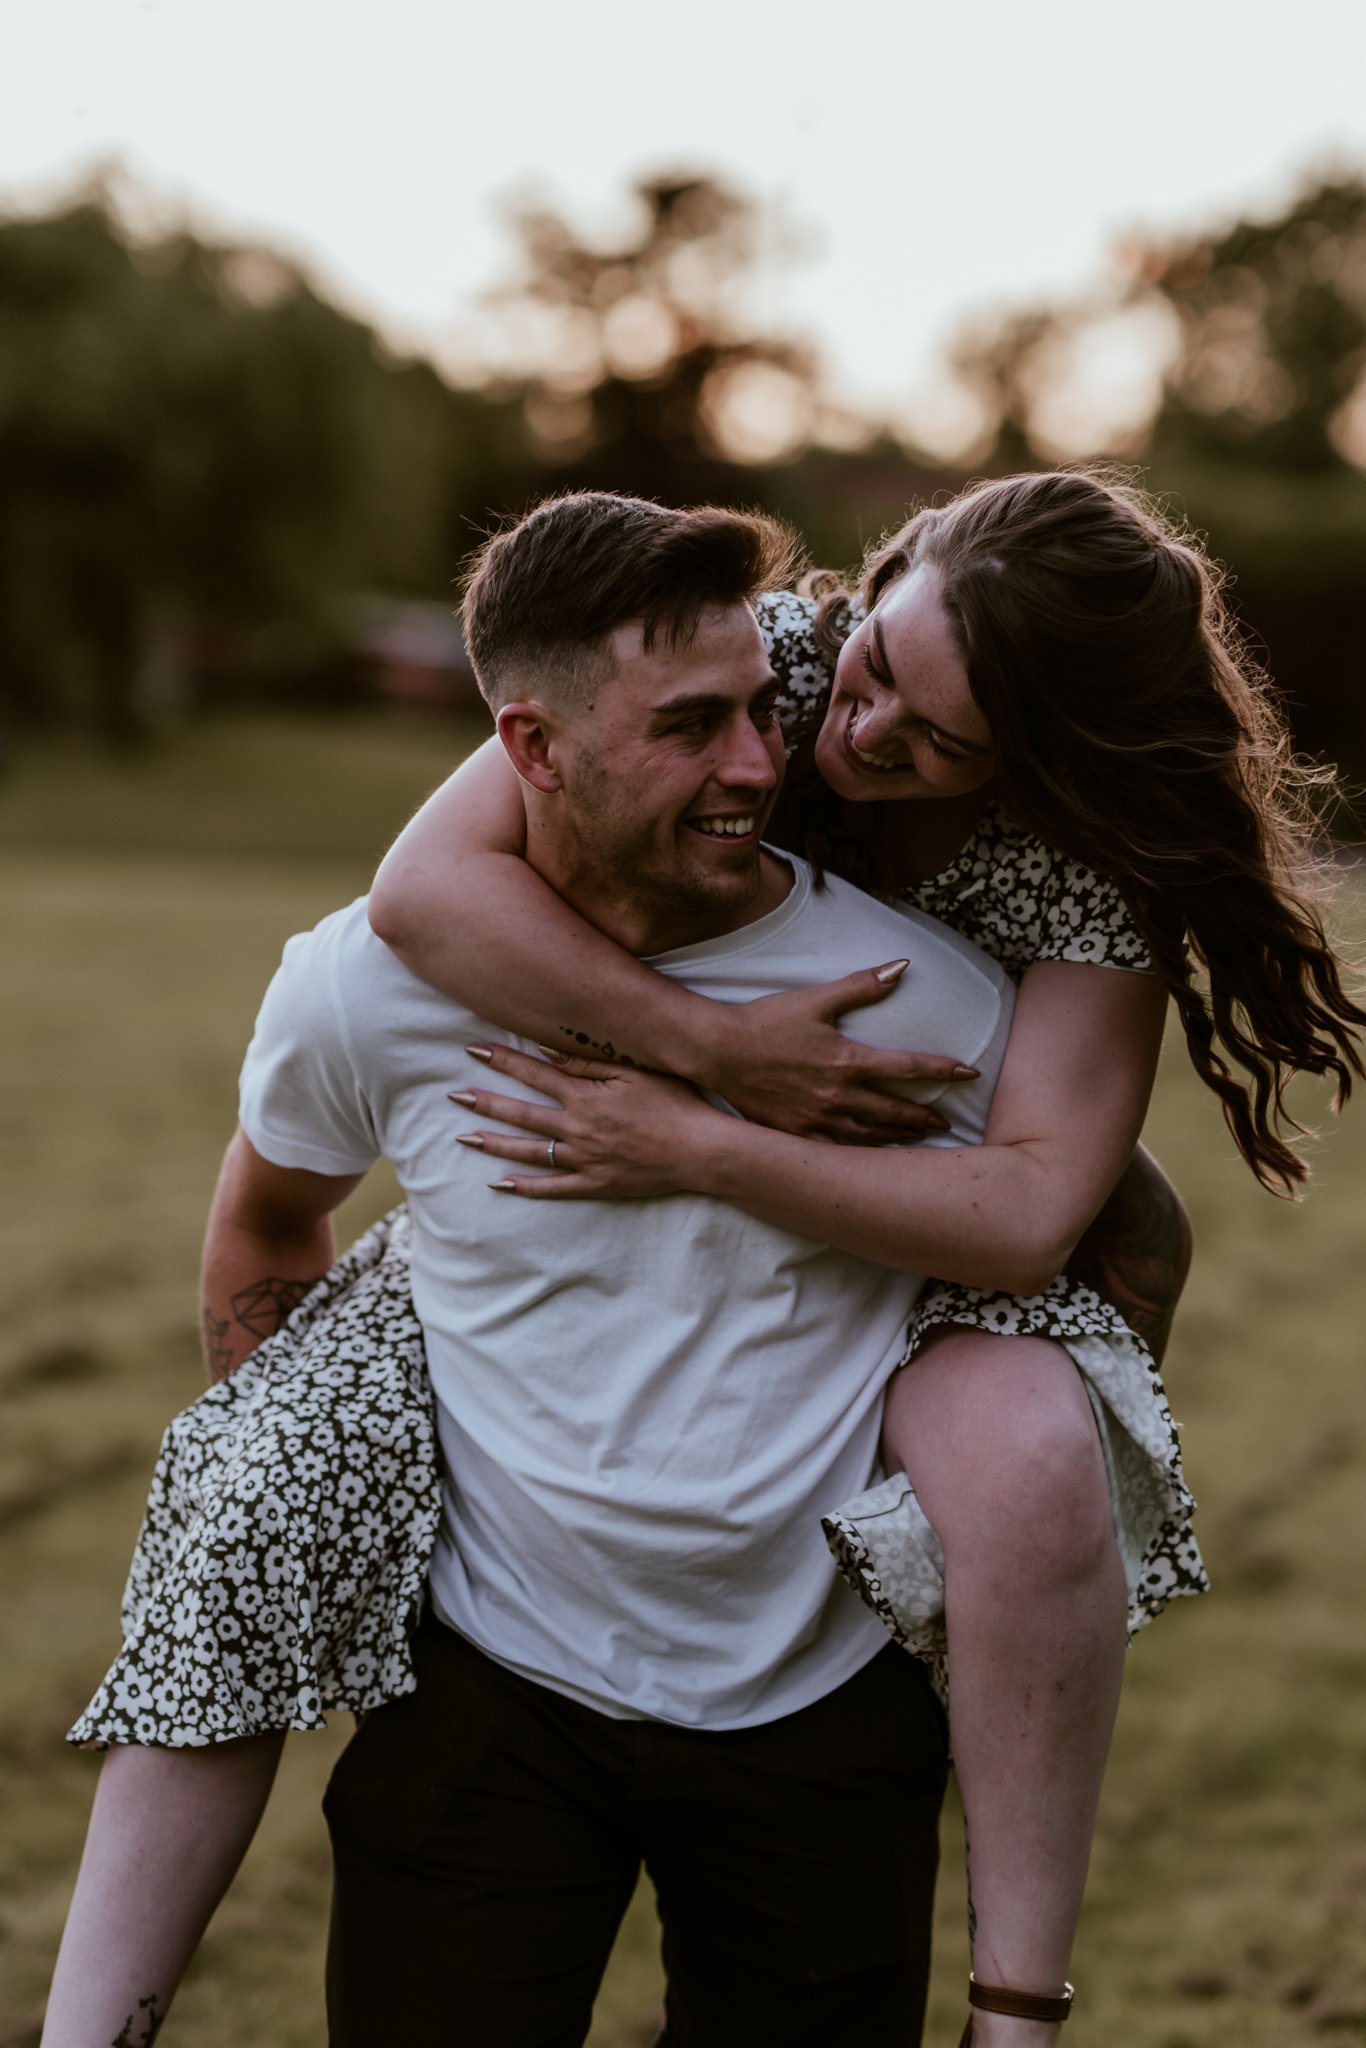 Angus Scotland Engagement and Wedding Photographer - Emily and Gabriel - Adventure Couple Session137.jpg